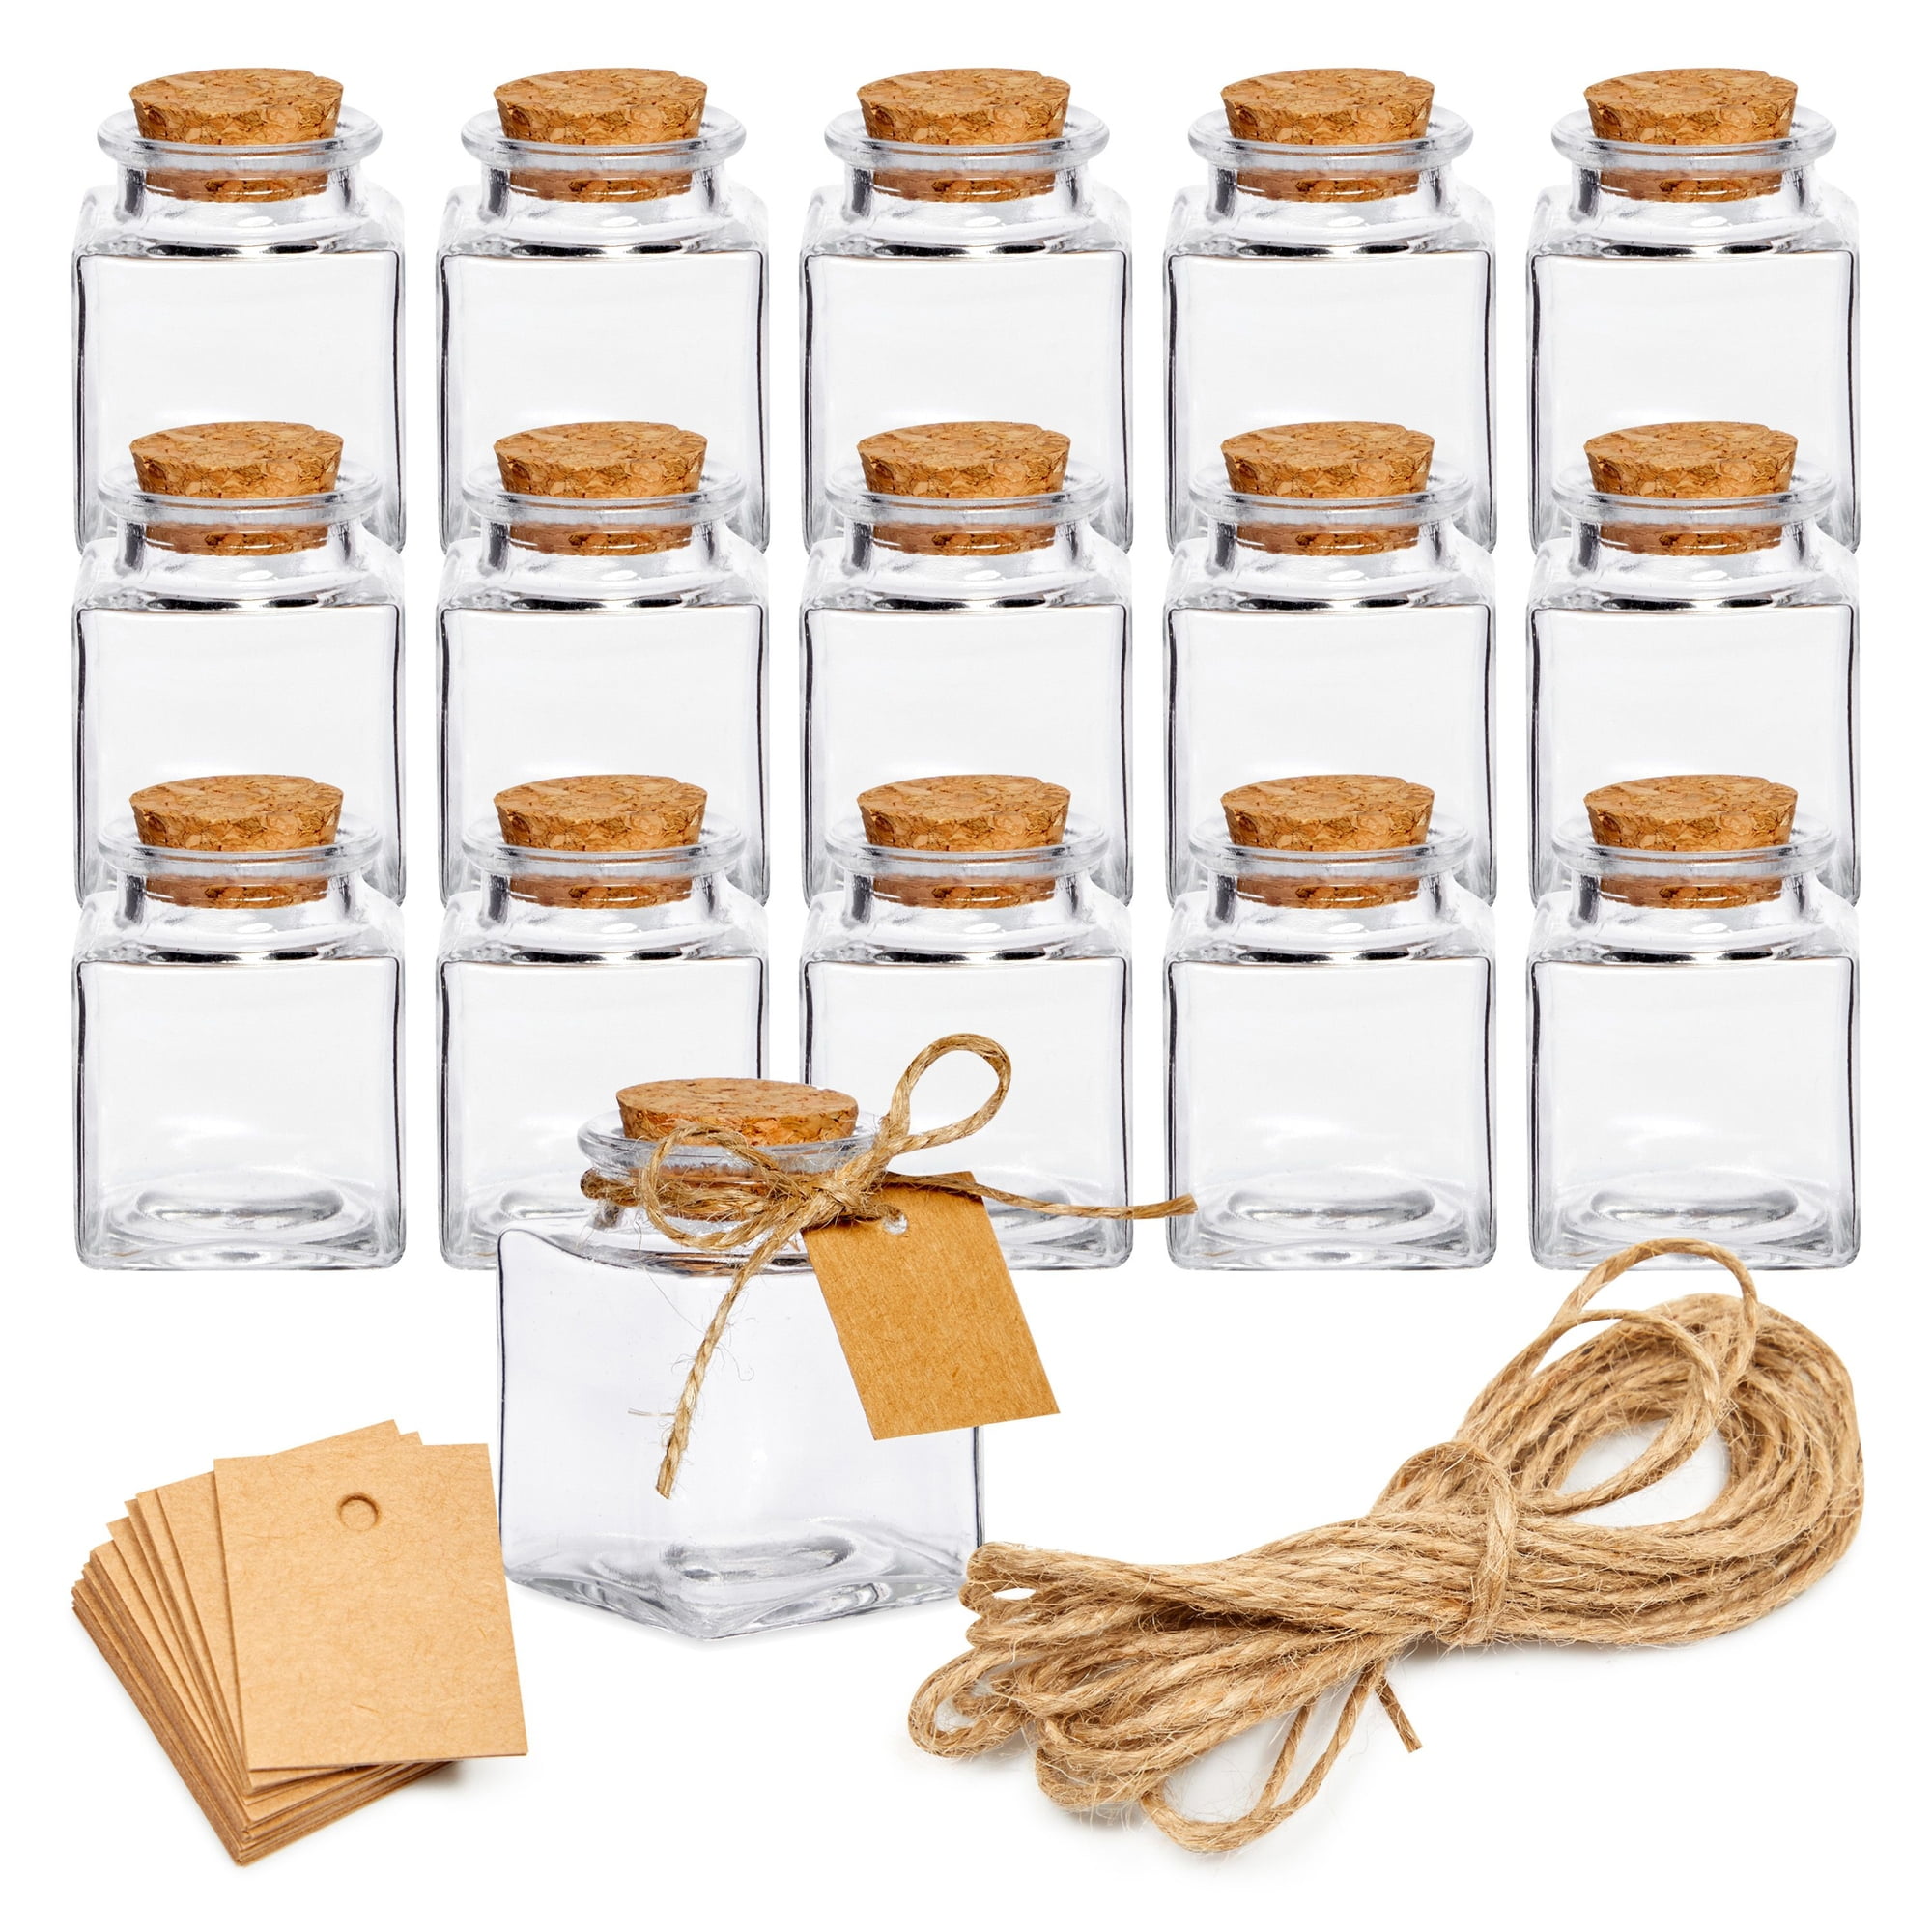 CRASPIRE 1 Set 15PCS 50ml Clear Glass Bottles Candy Bottle with